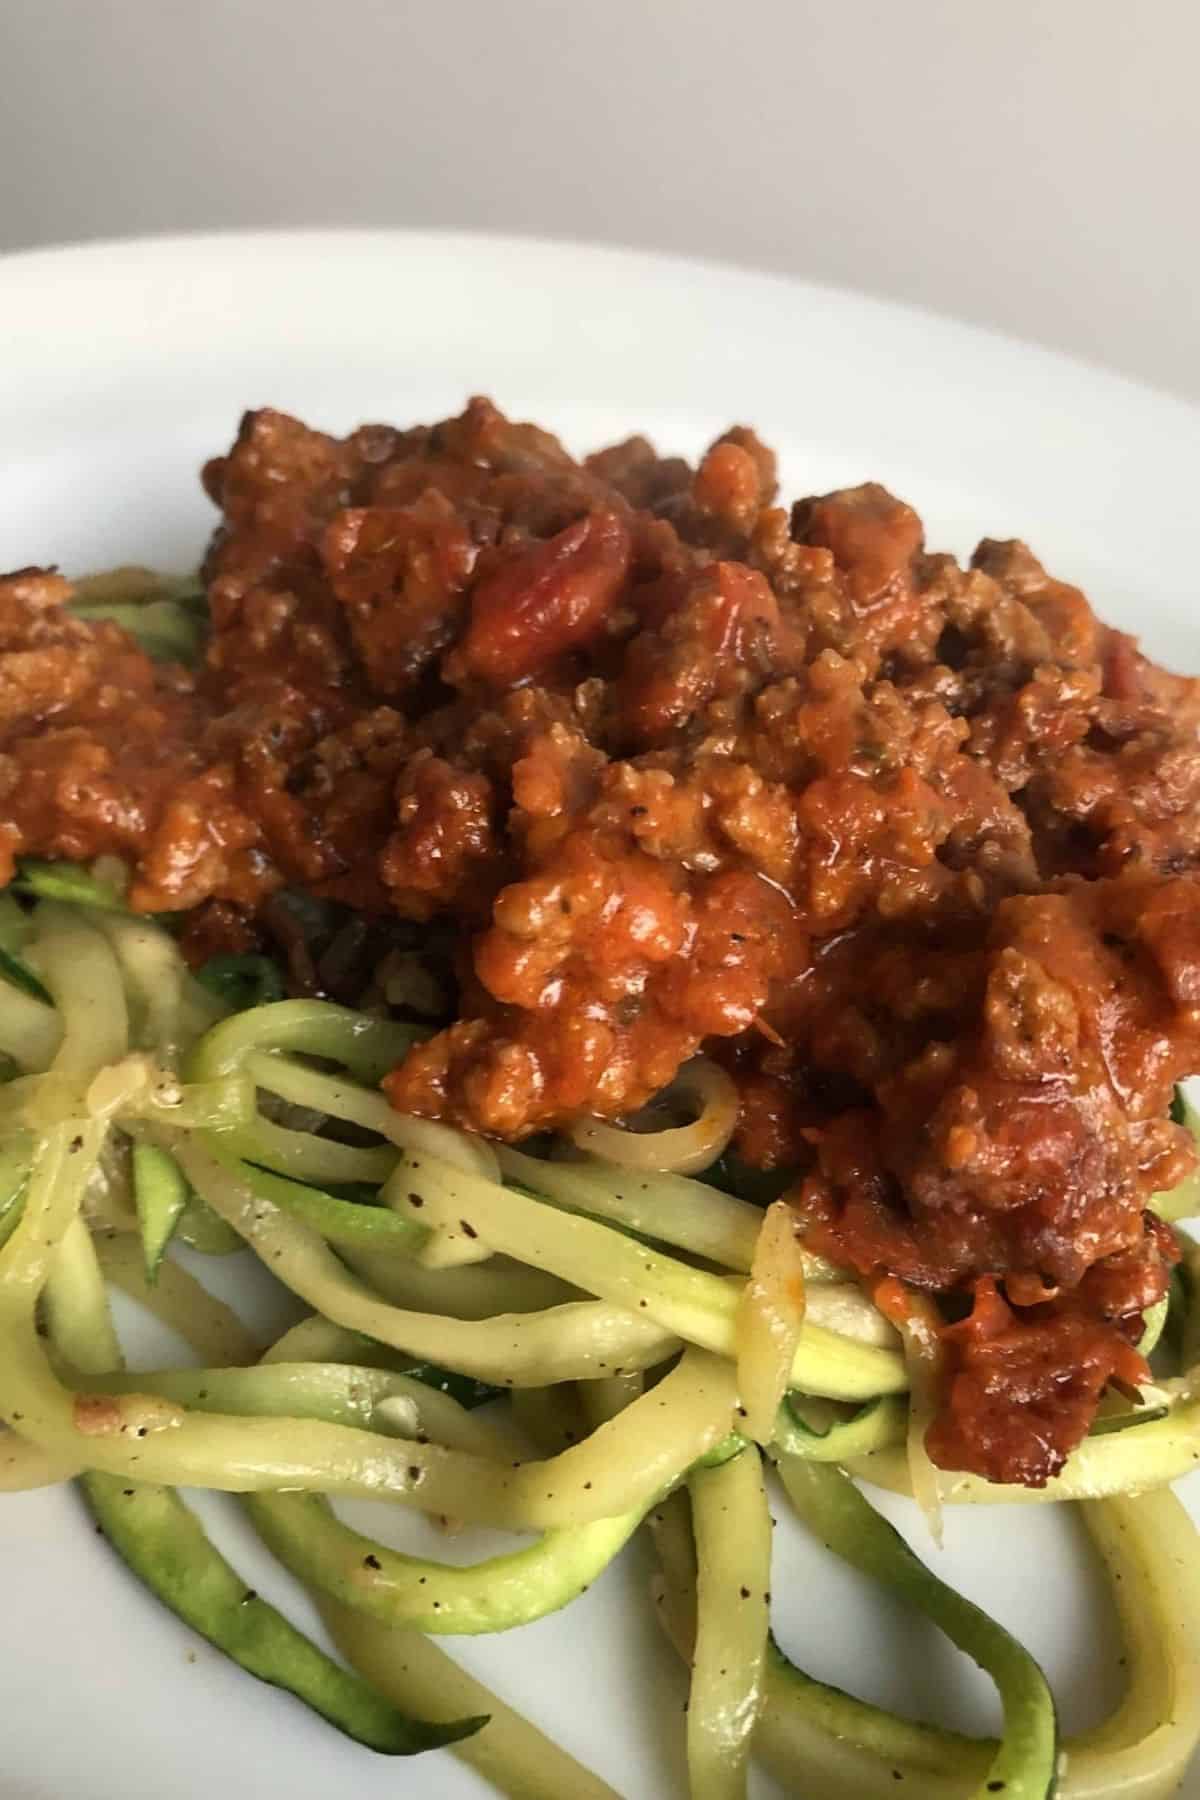 zucchini noodles topped with a meat sauce.